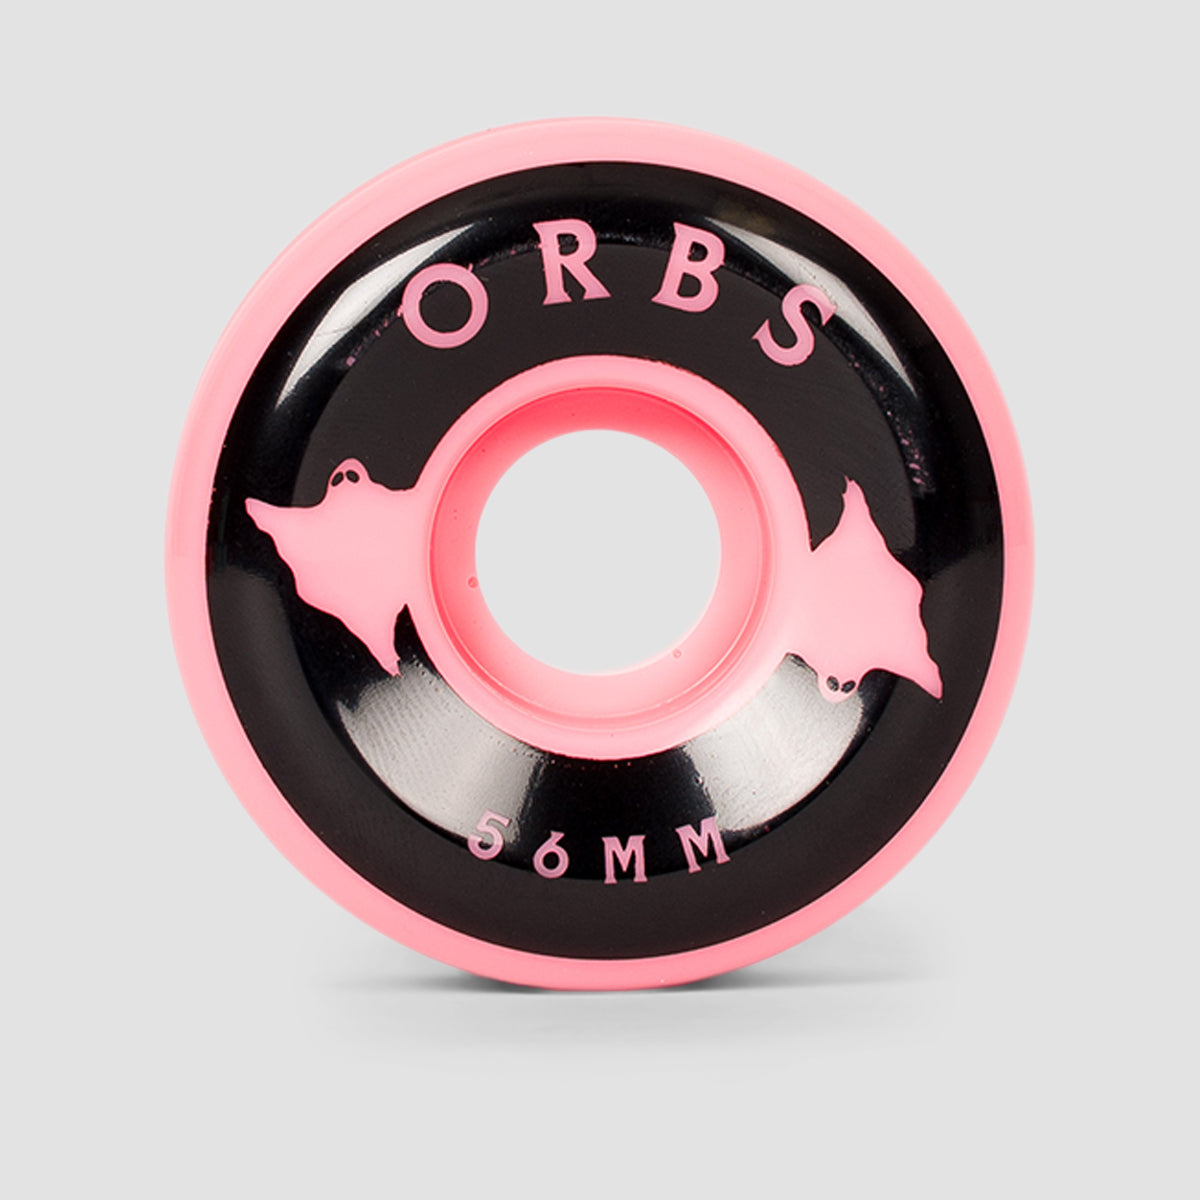 Welcome Orbs Specters Solid Conical 99A Skateboard Wheels Coral 56mm